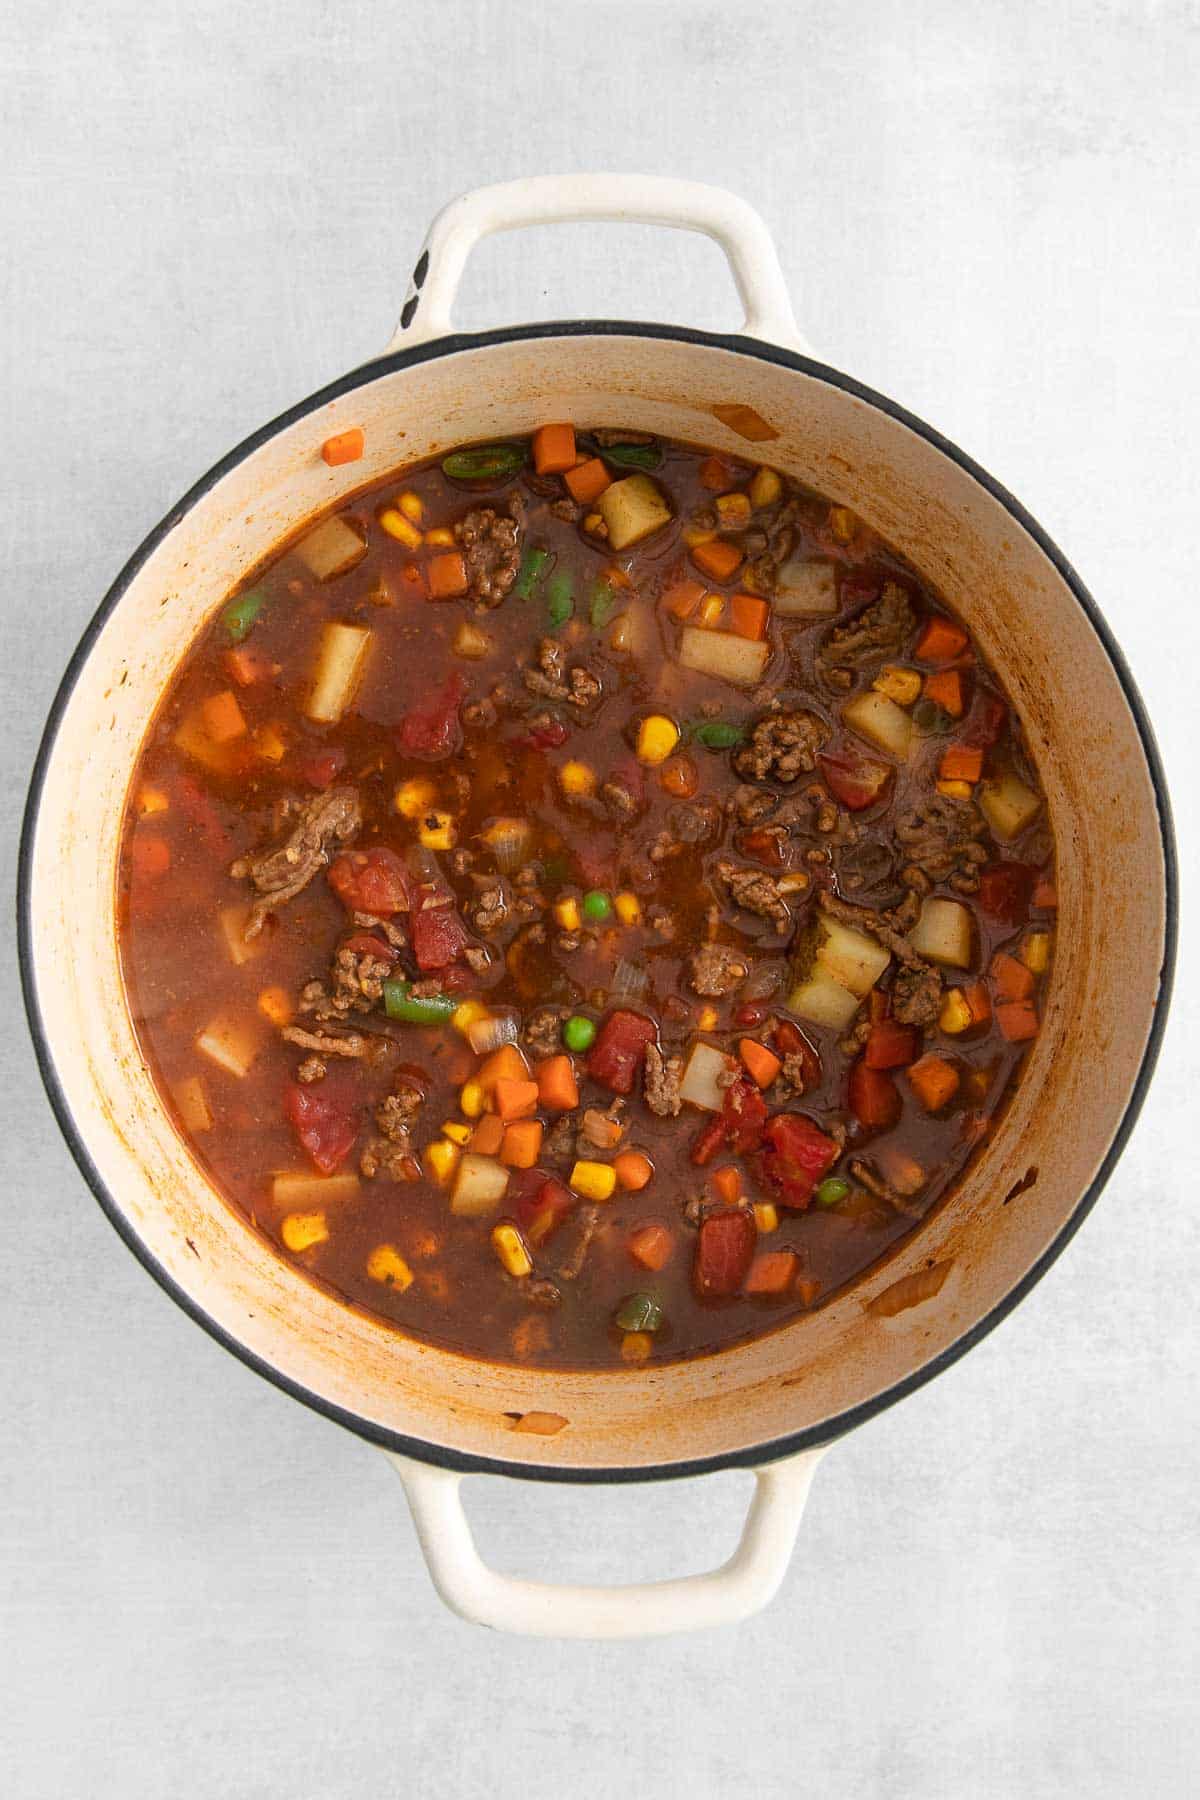 soup pot full of hamburger soup with vegetables.